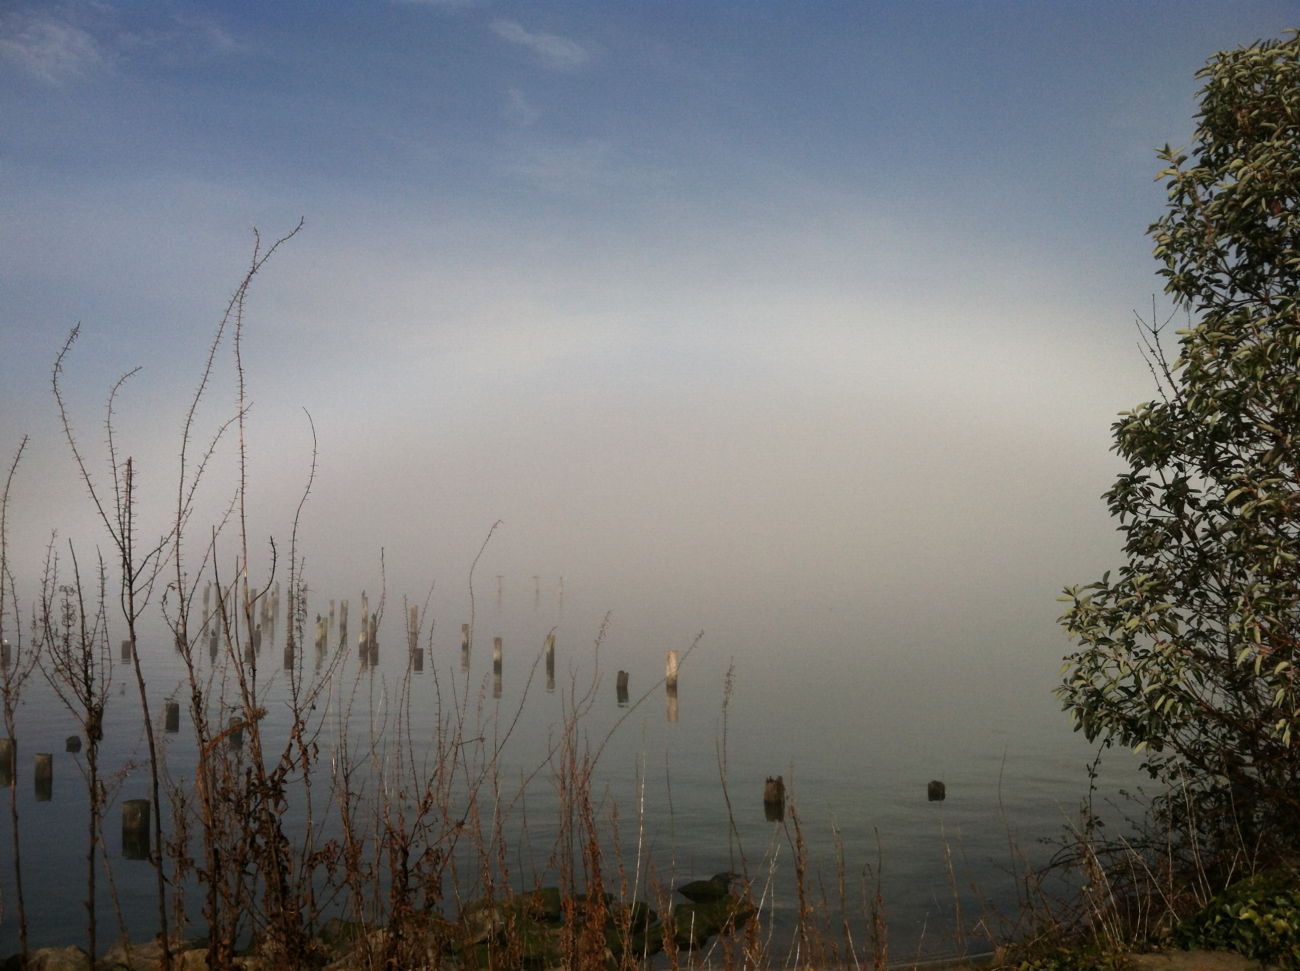 Fog bow seen at Titlow Park while walking dog early in the morning